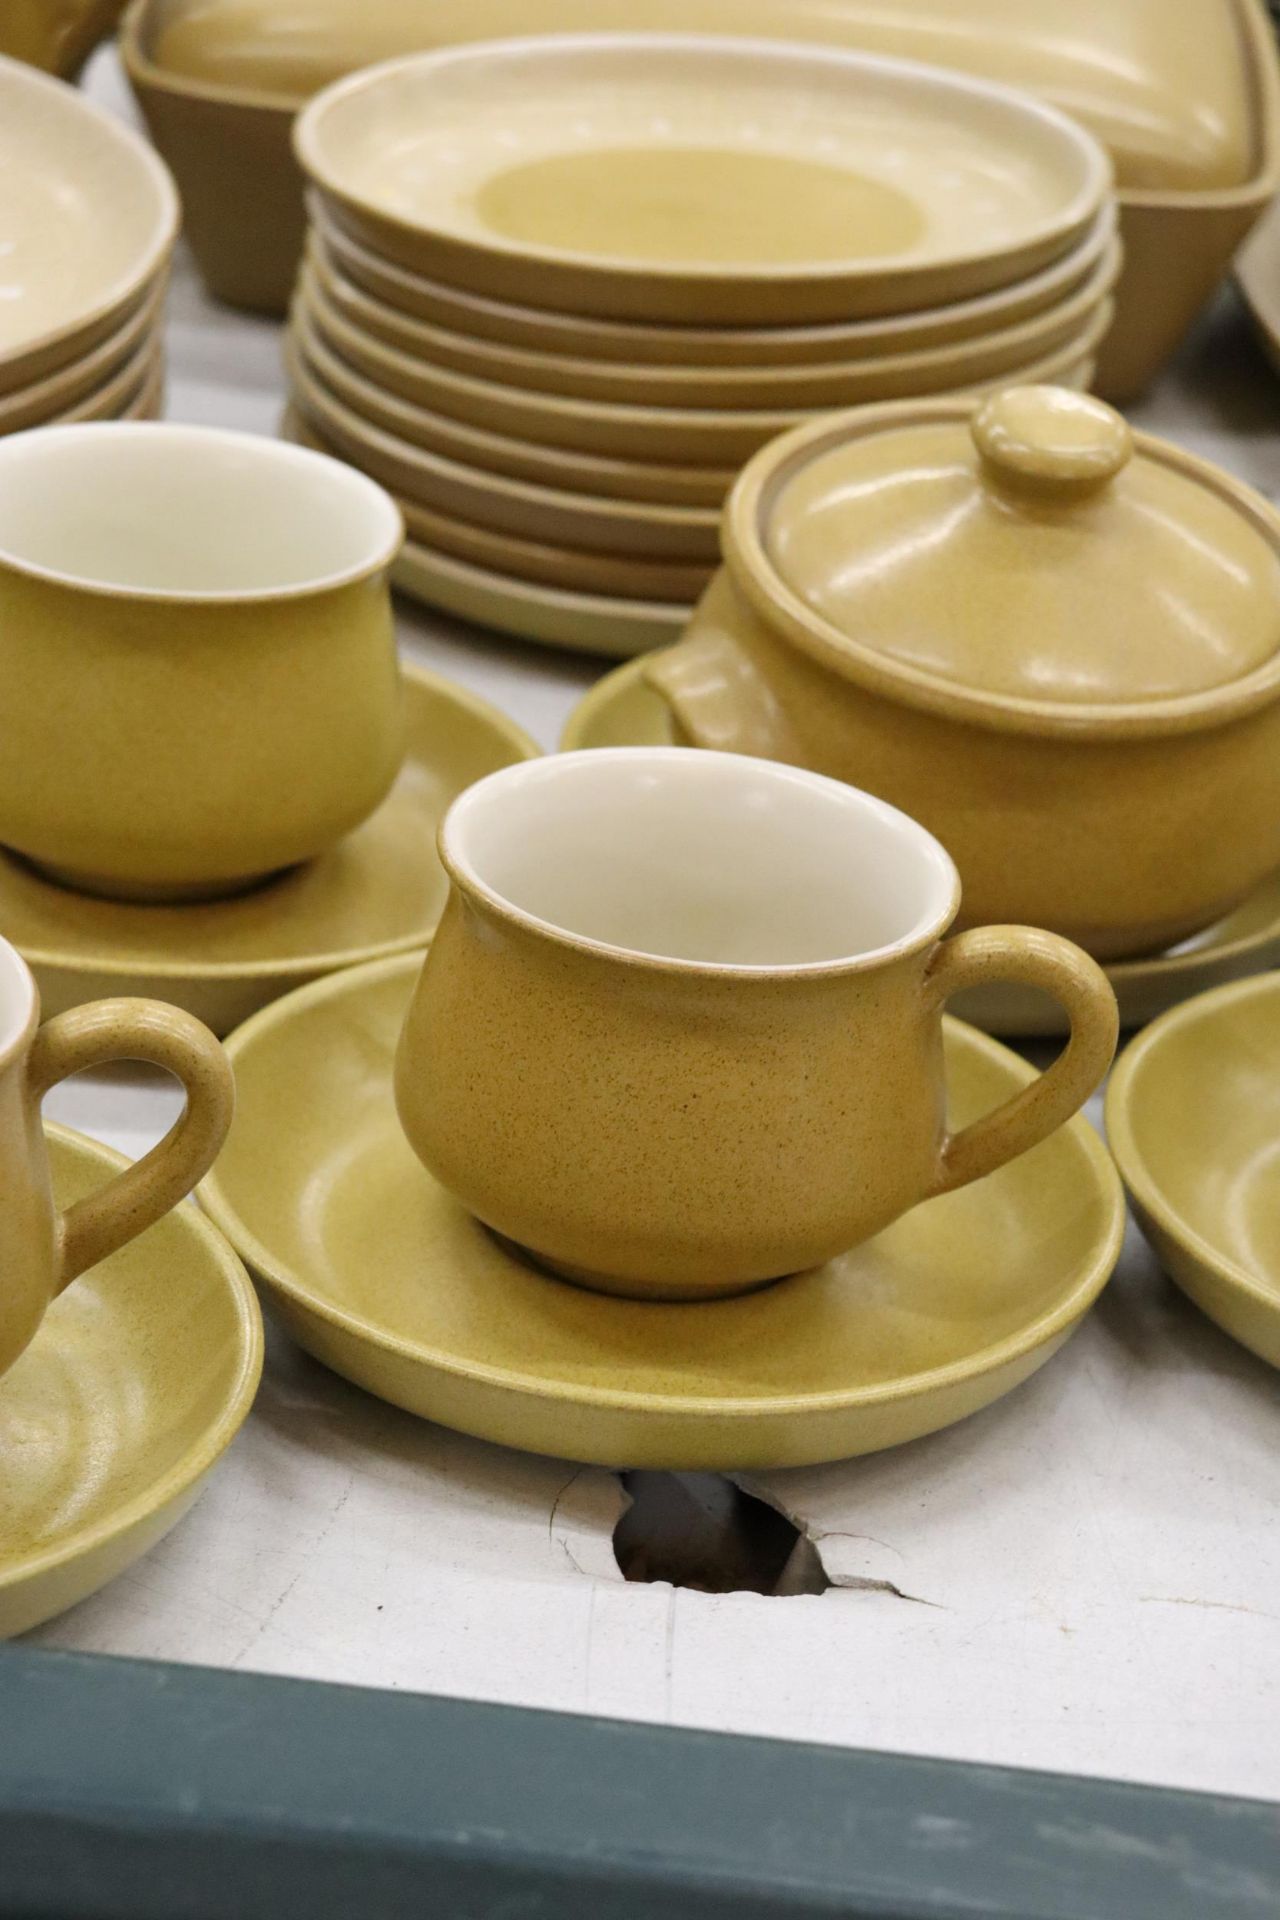 A DENBY MUSTARD COLOURED DINNER SERVICE, TO INCLUDE VARIOUS SIZES OF PLATES, A CASSEROLE DISH, - Image 3 of 9